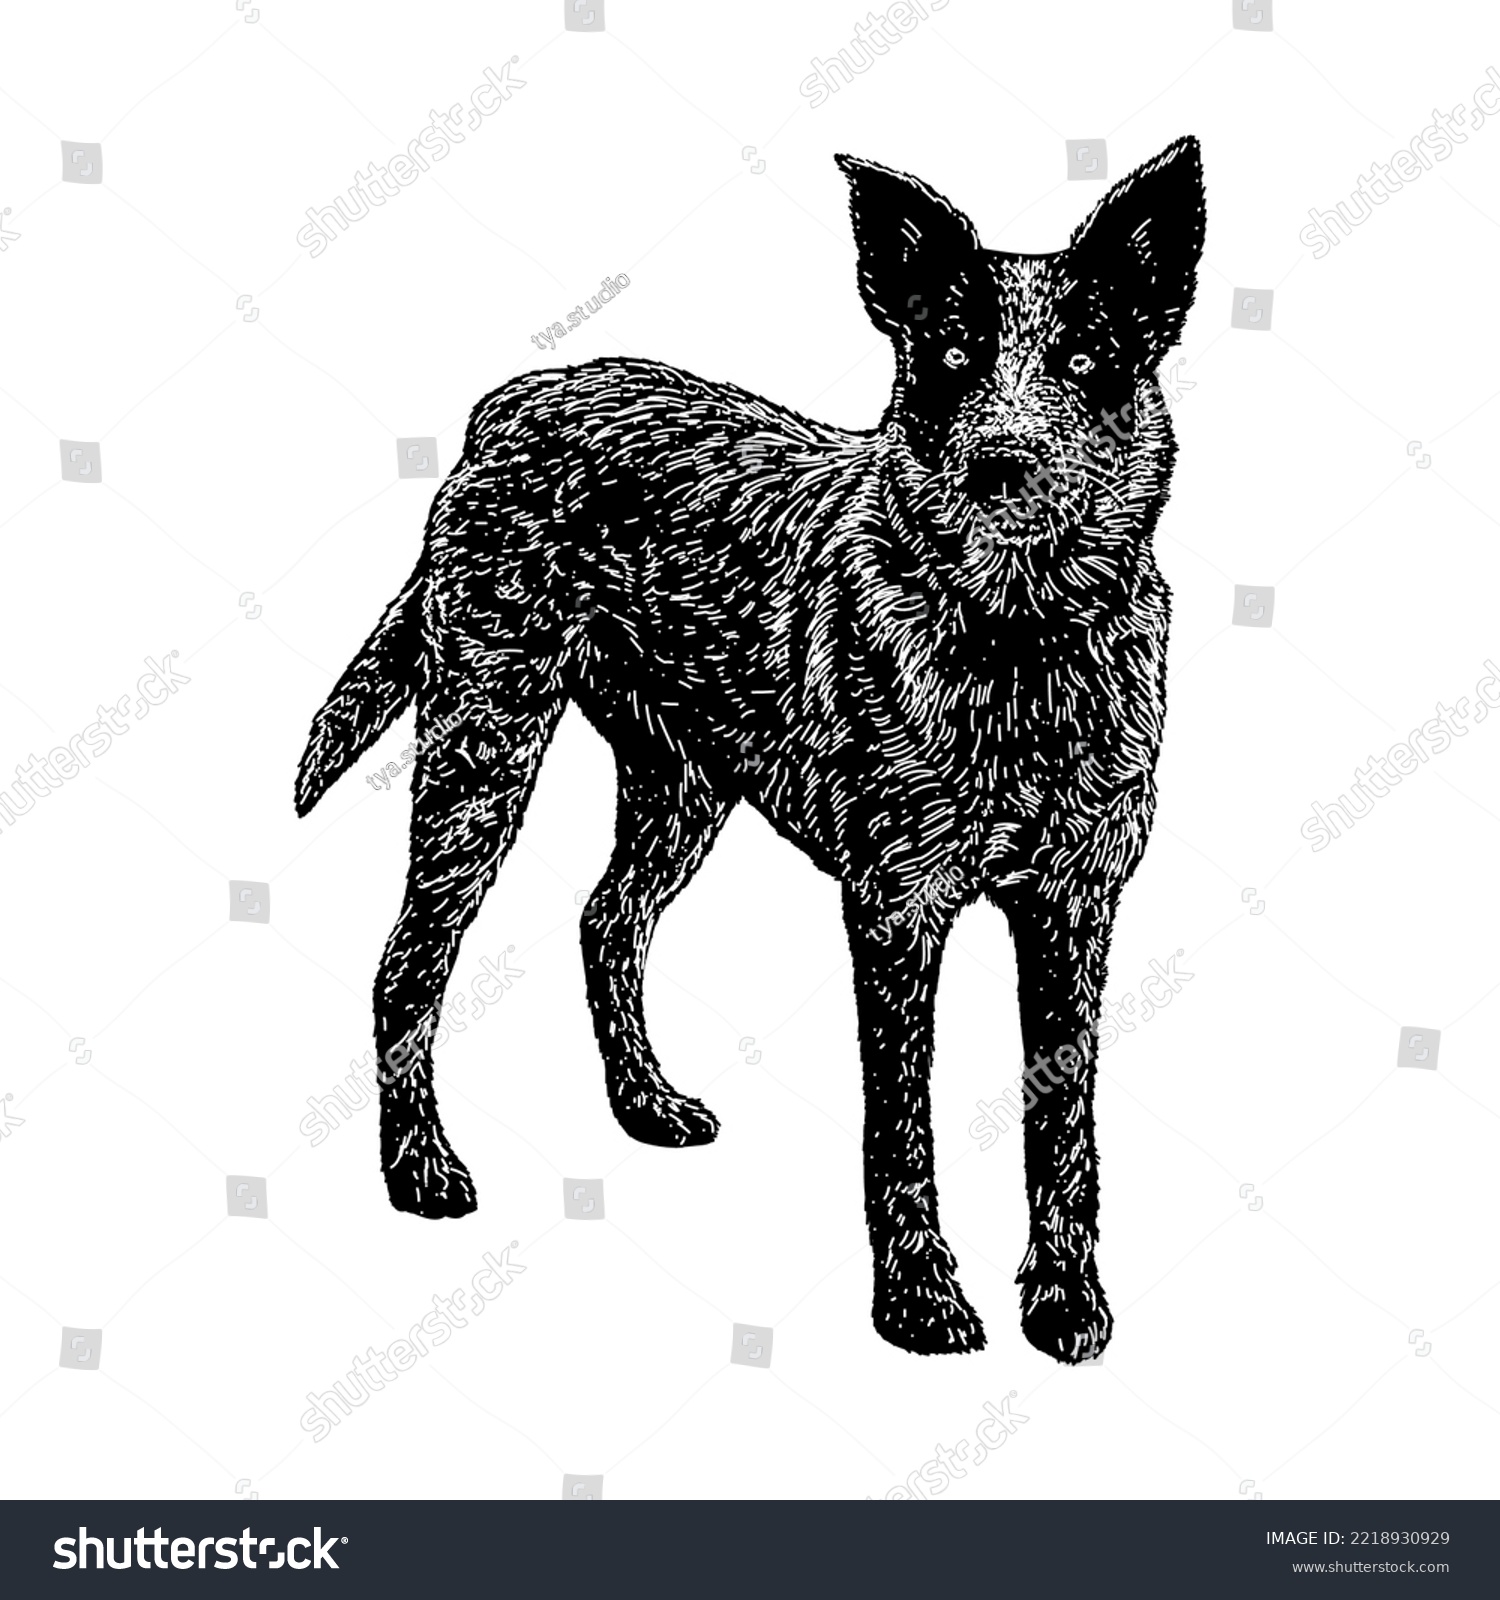 SVG of Texas Heeler hand drawing. Vector illustration isolated on white background. svg